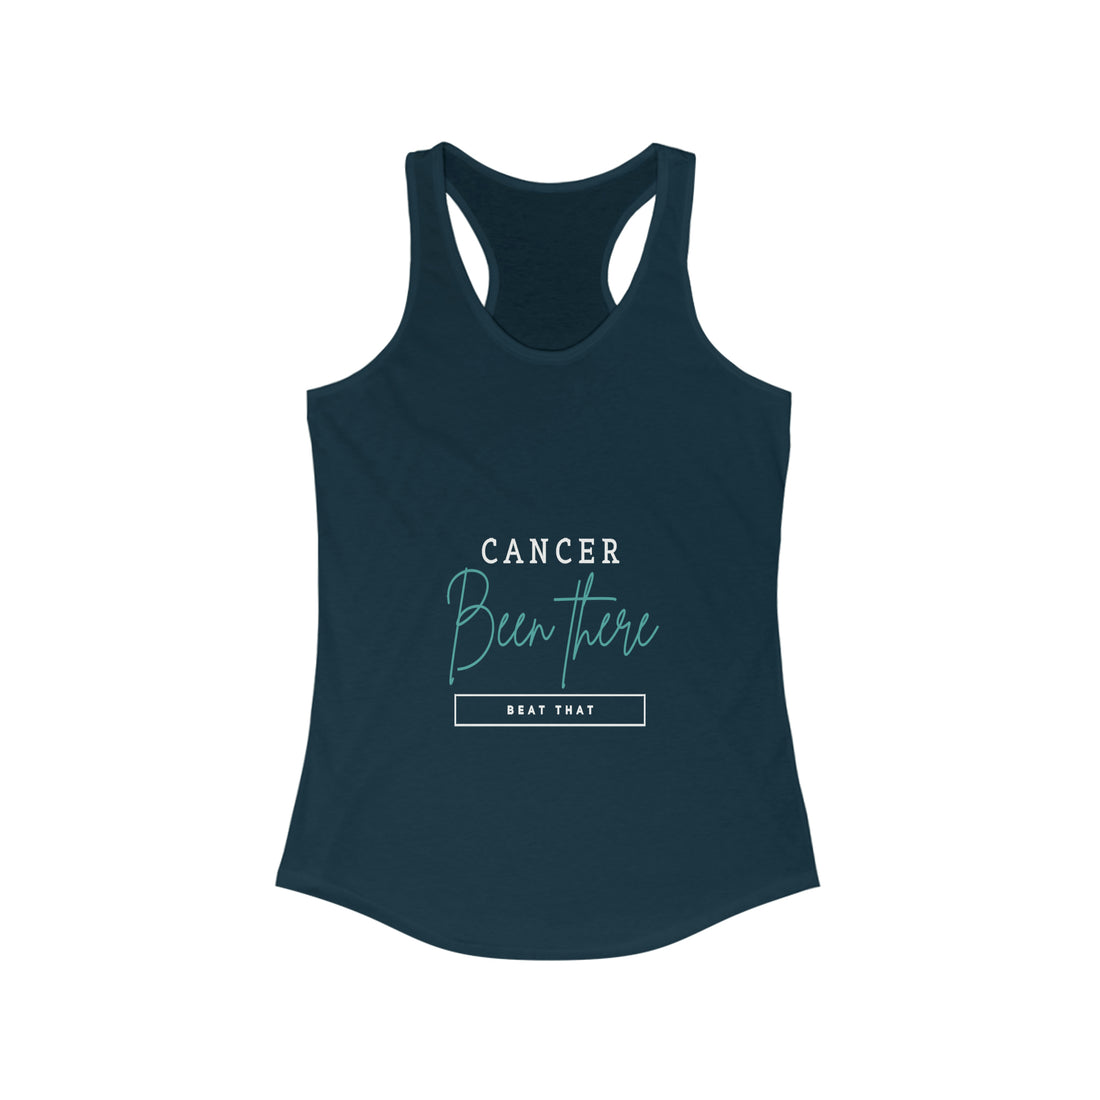 Cancer Been There Beat That - Racerback Tank Top